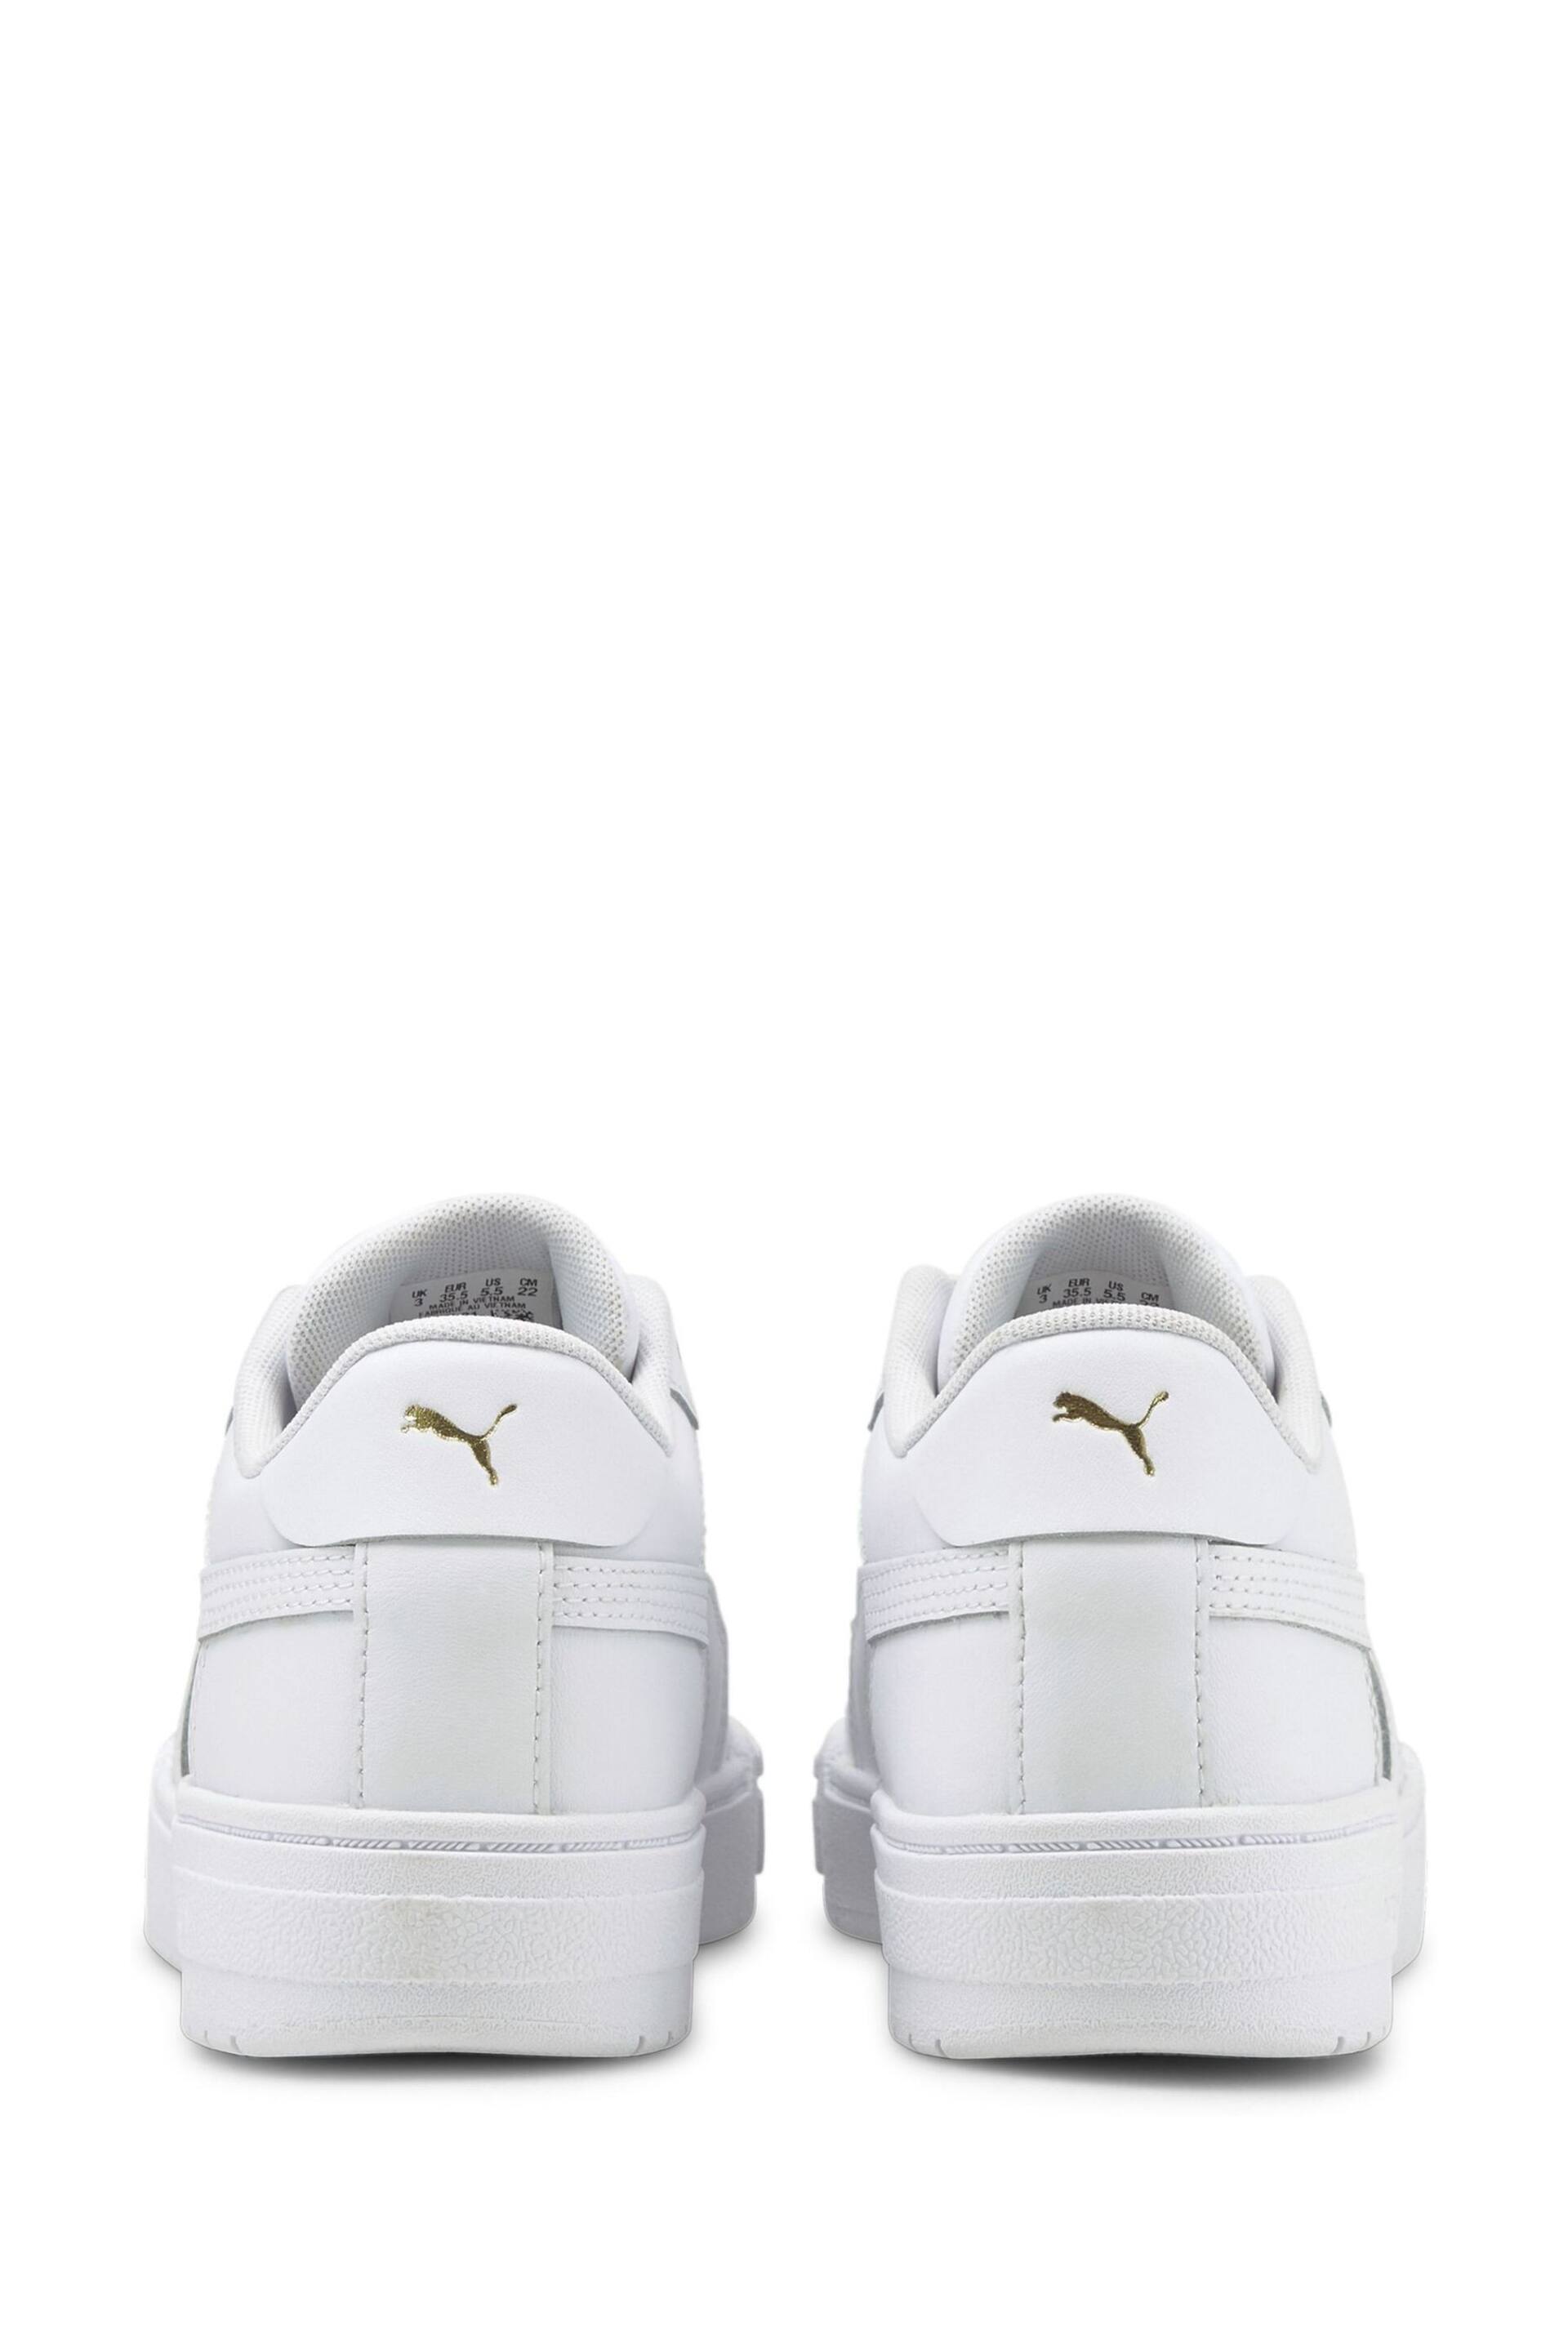 Puma White CA Pro Classic Youth Trainers - Image 5 of 6